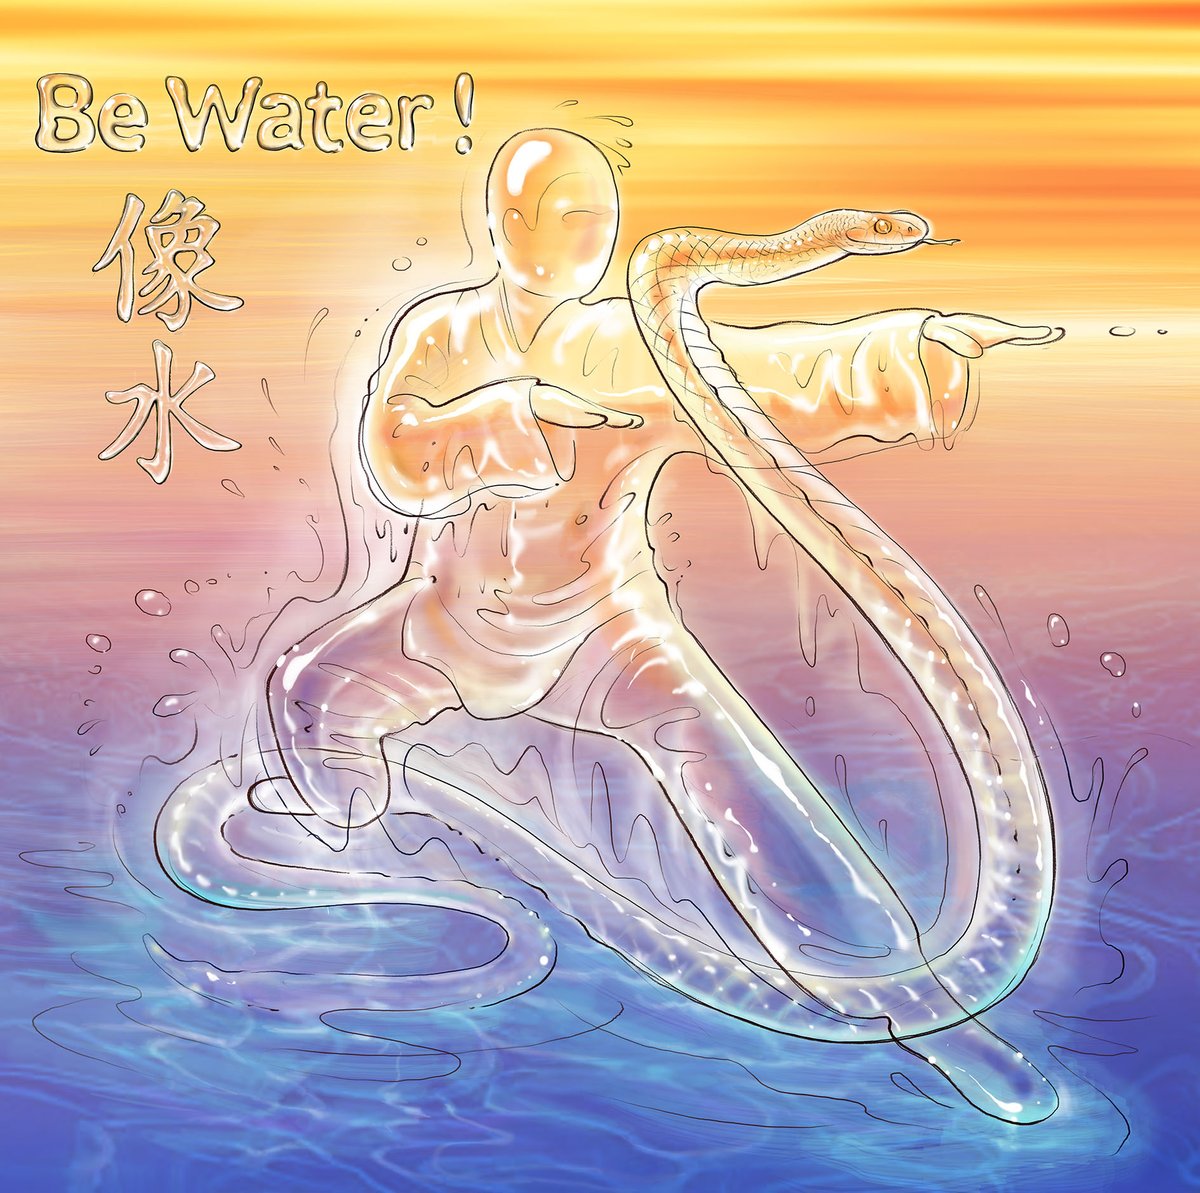 🐍🥋 Embrace the fluidity and precision of the serpent as you delve into  the ancient art of Kung Fu ! 
go-starpeace.com/pages/be-water
.
@penno_bastien
@___MICKA____
@YannPenno
.                 
#shaolin #wushu #martialarts #wudangshaolindream